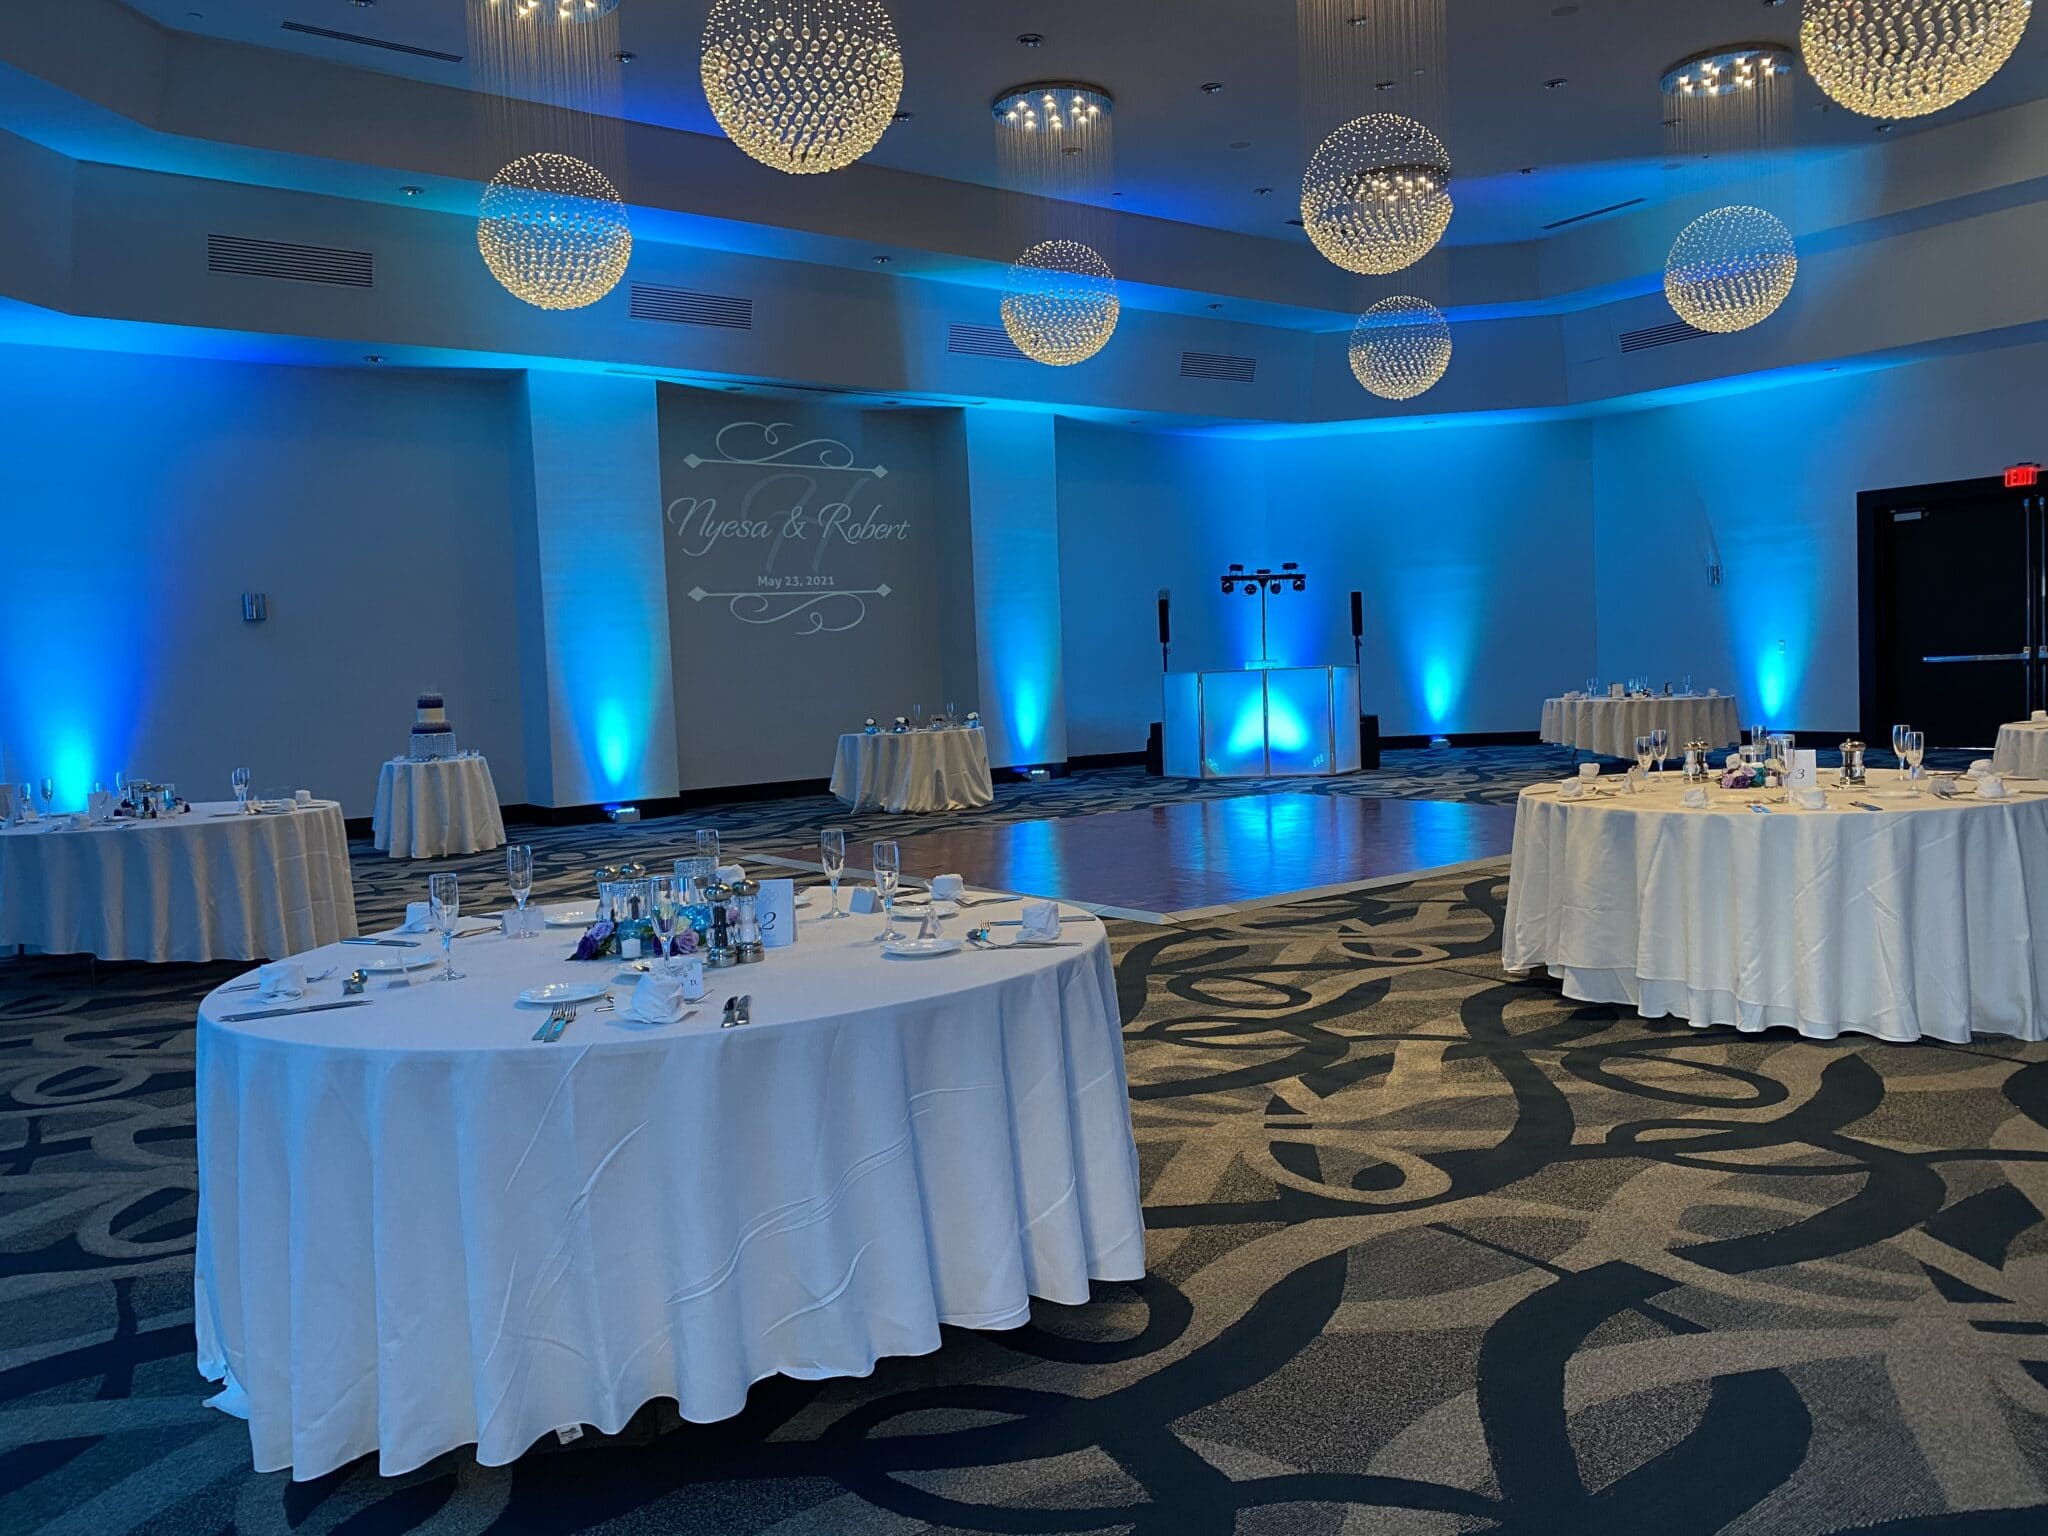 B Resort wedding reception in ballroom with blue uplighting and circle chandeliers